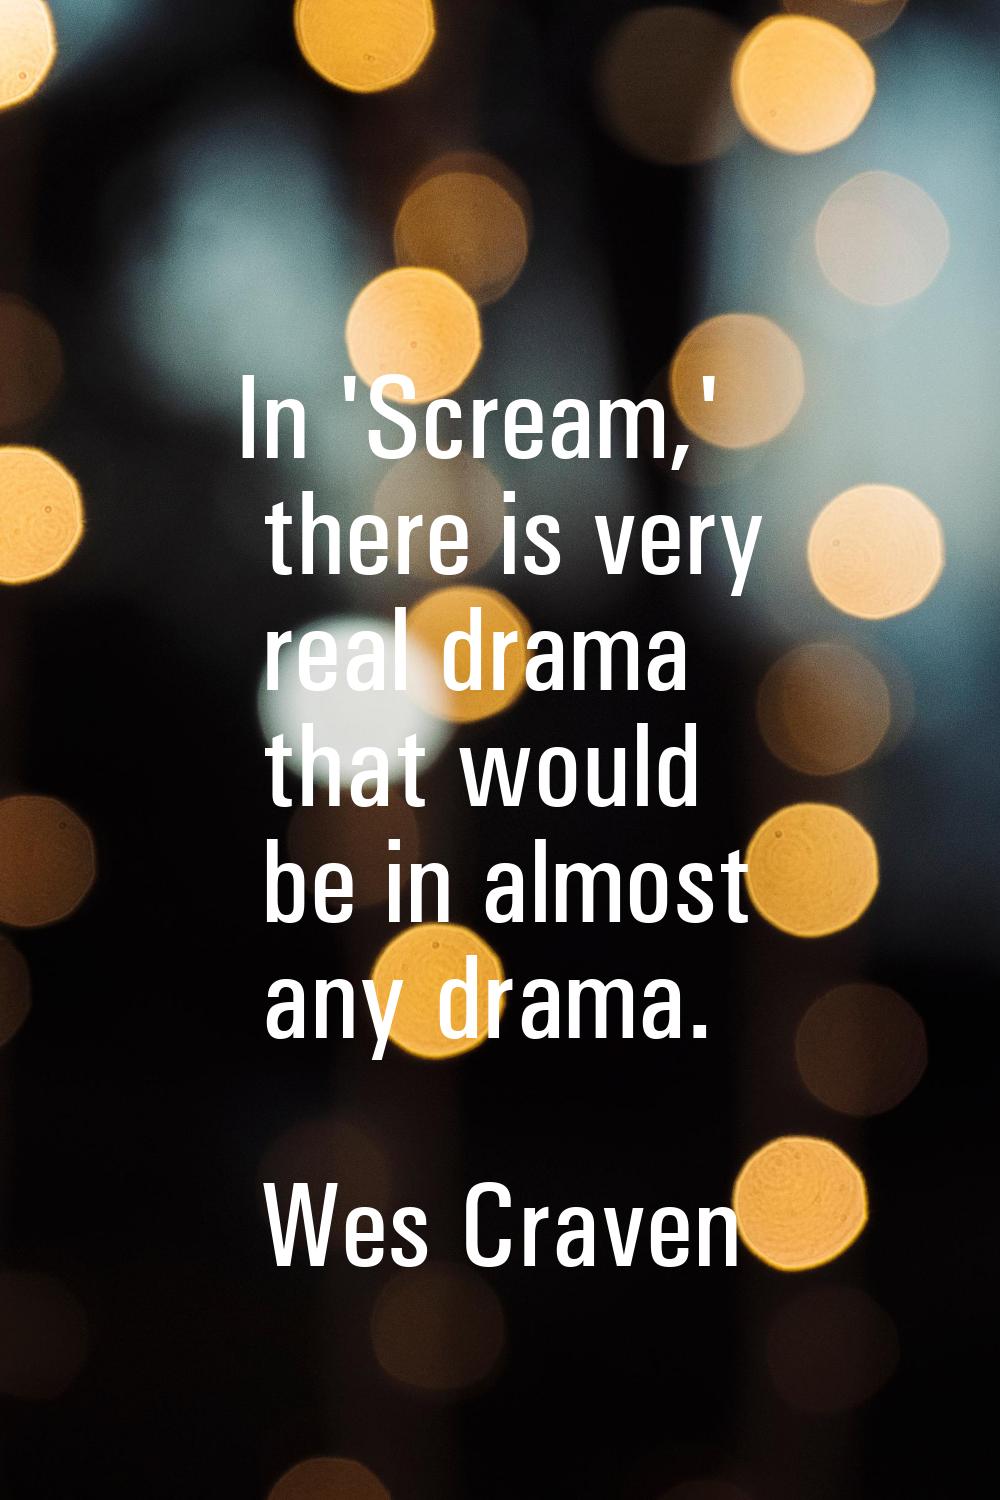 In 'Scream,' there is very real drama that would be in almost any drama.